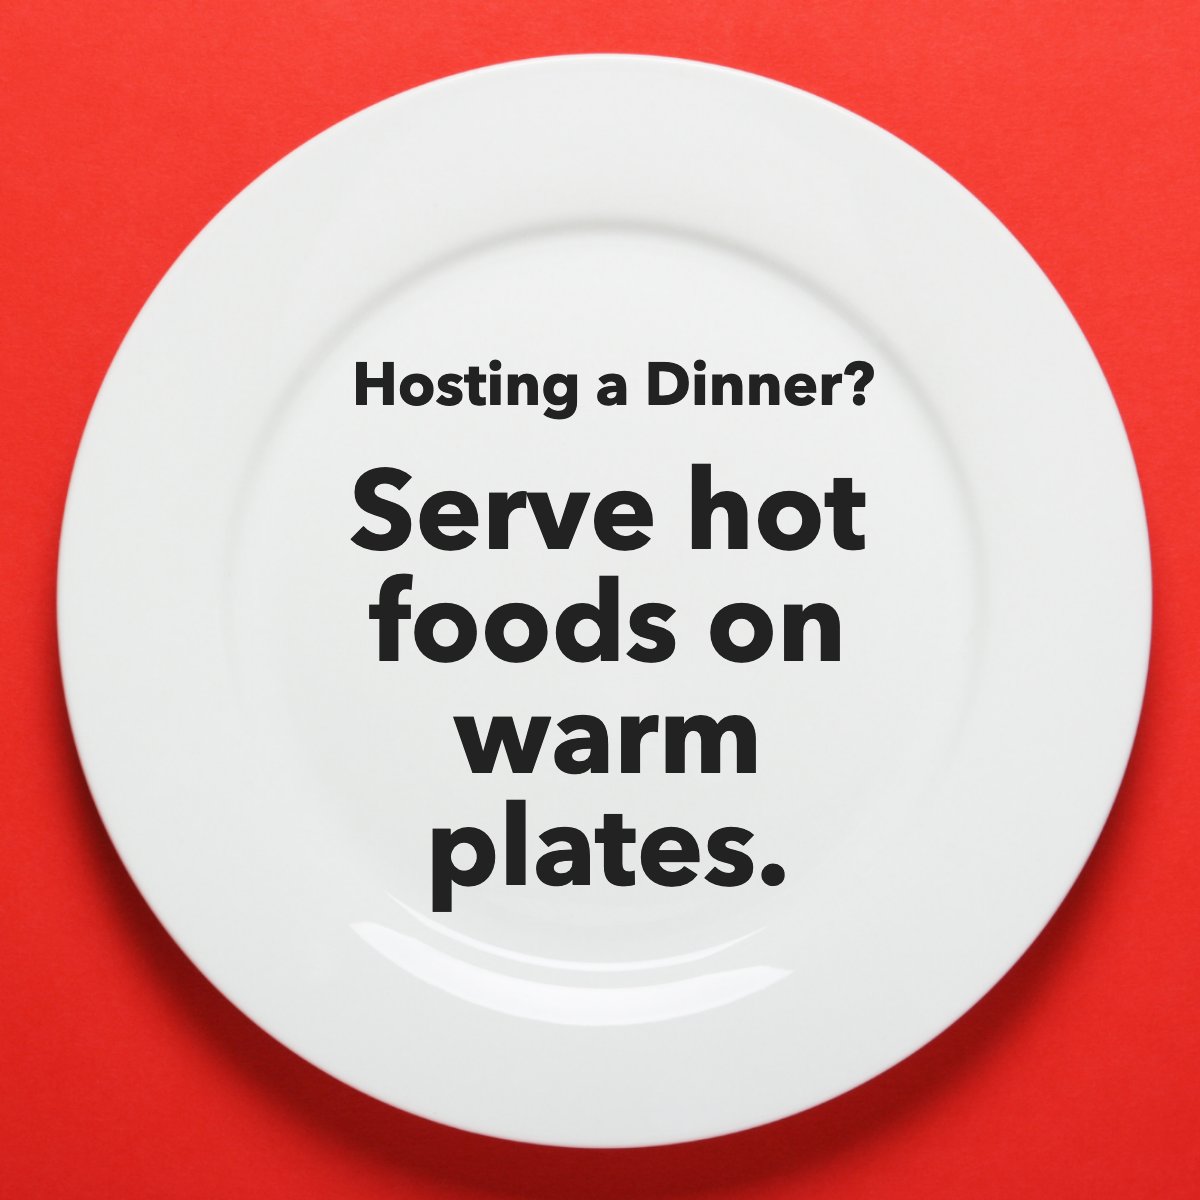 Hosting a Dinner? 

Check out this #lifehack:

Serve hot food on warm plates 🍽, that way no one gets a cold serving 🔥

What is your best advice for hosting dinners? Share it below!

   #host    #hosting    #dinner    #hostingtips    #dinnerplate    #kitchenhack